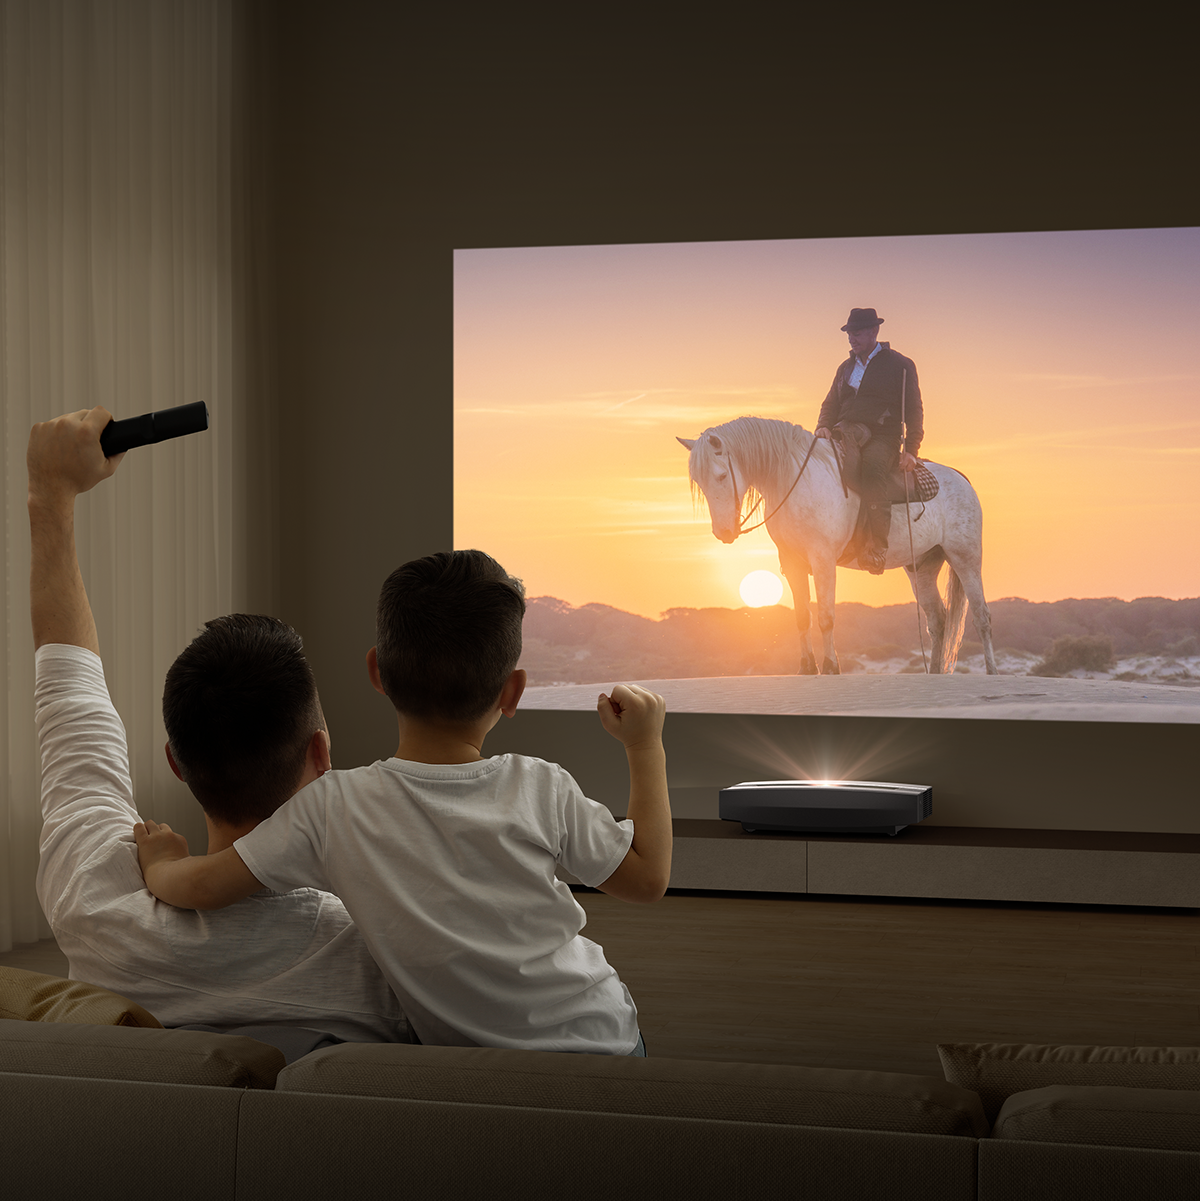 How To Convert Your Home Into A Movie Theater With An XGIMI Projector?